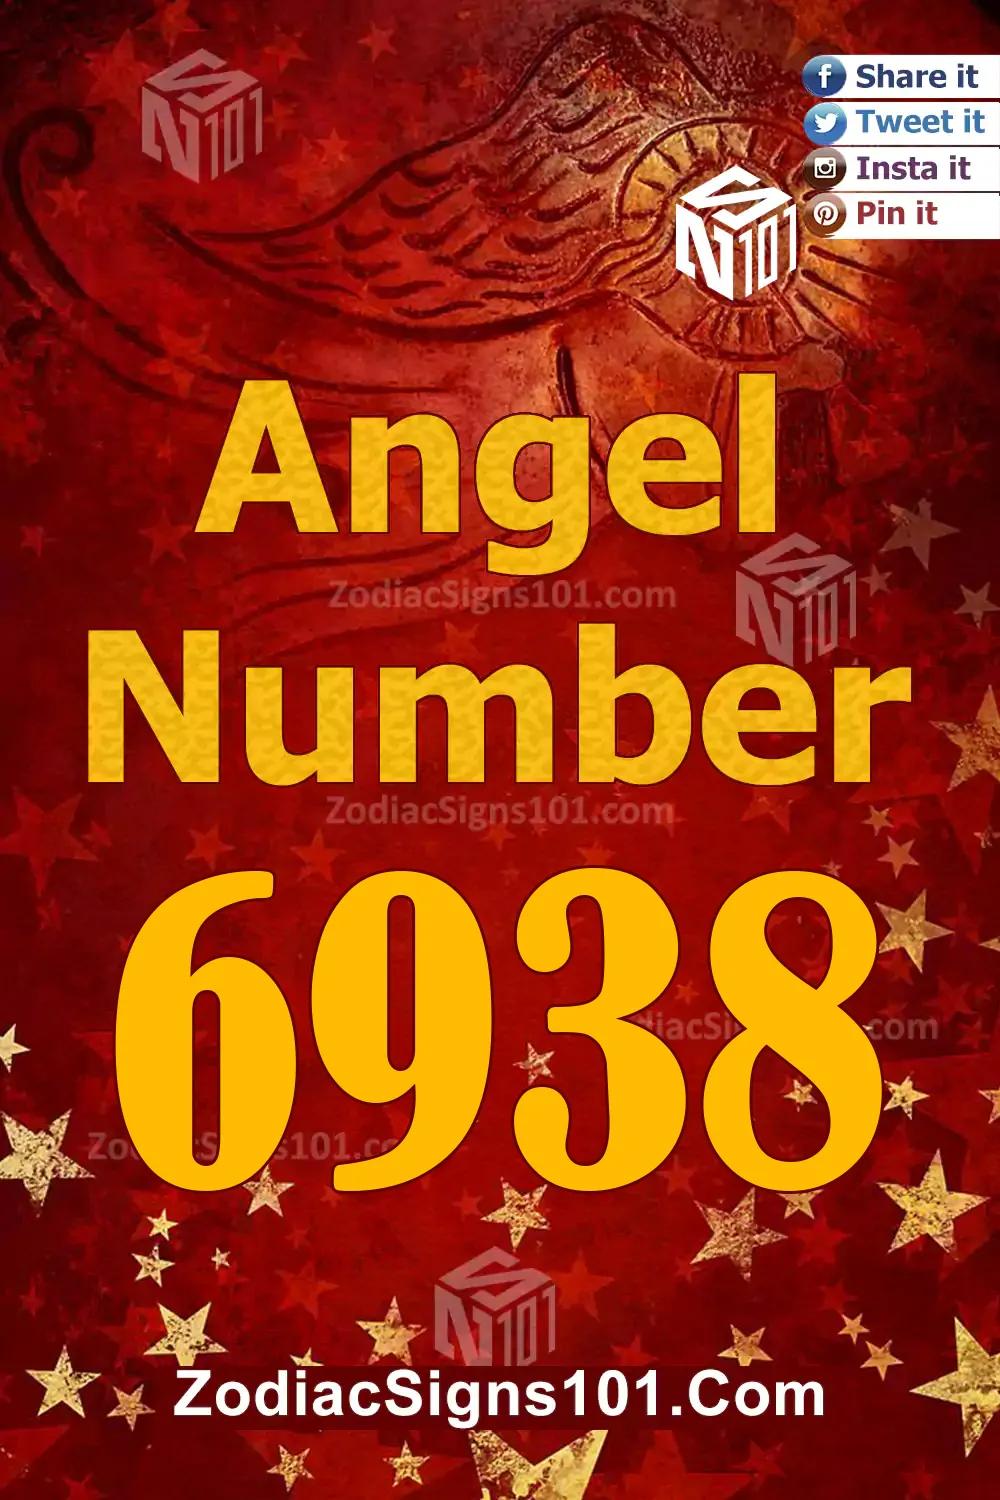 6938 Angel Number Meaning